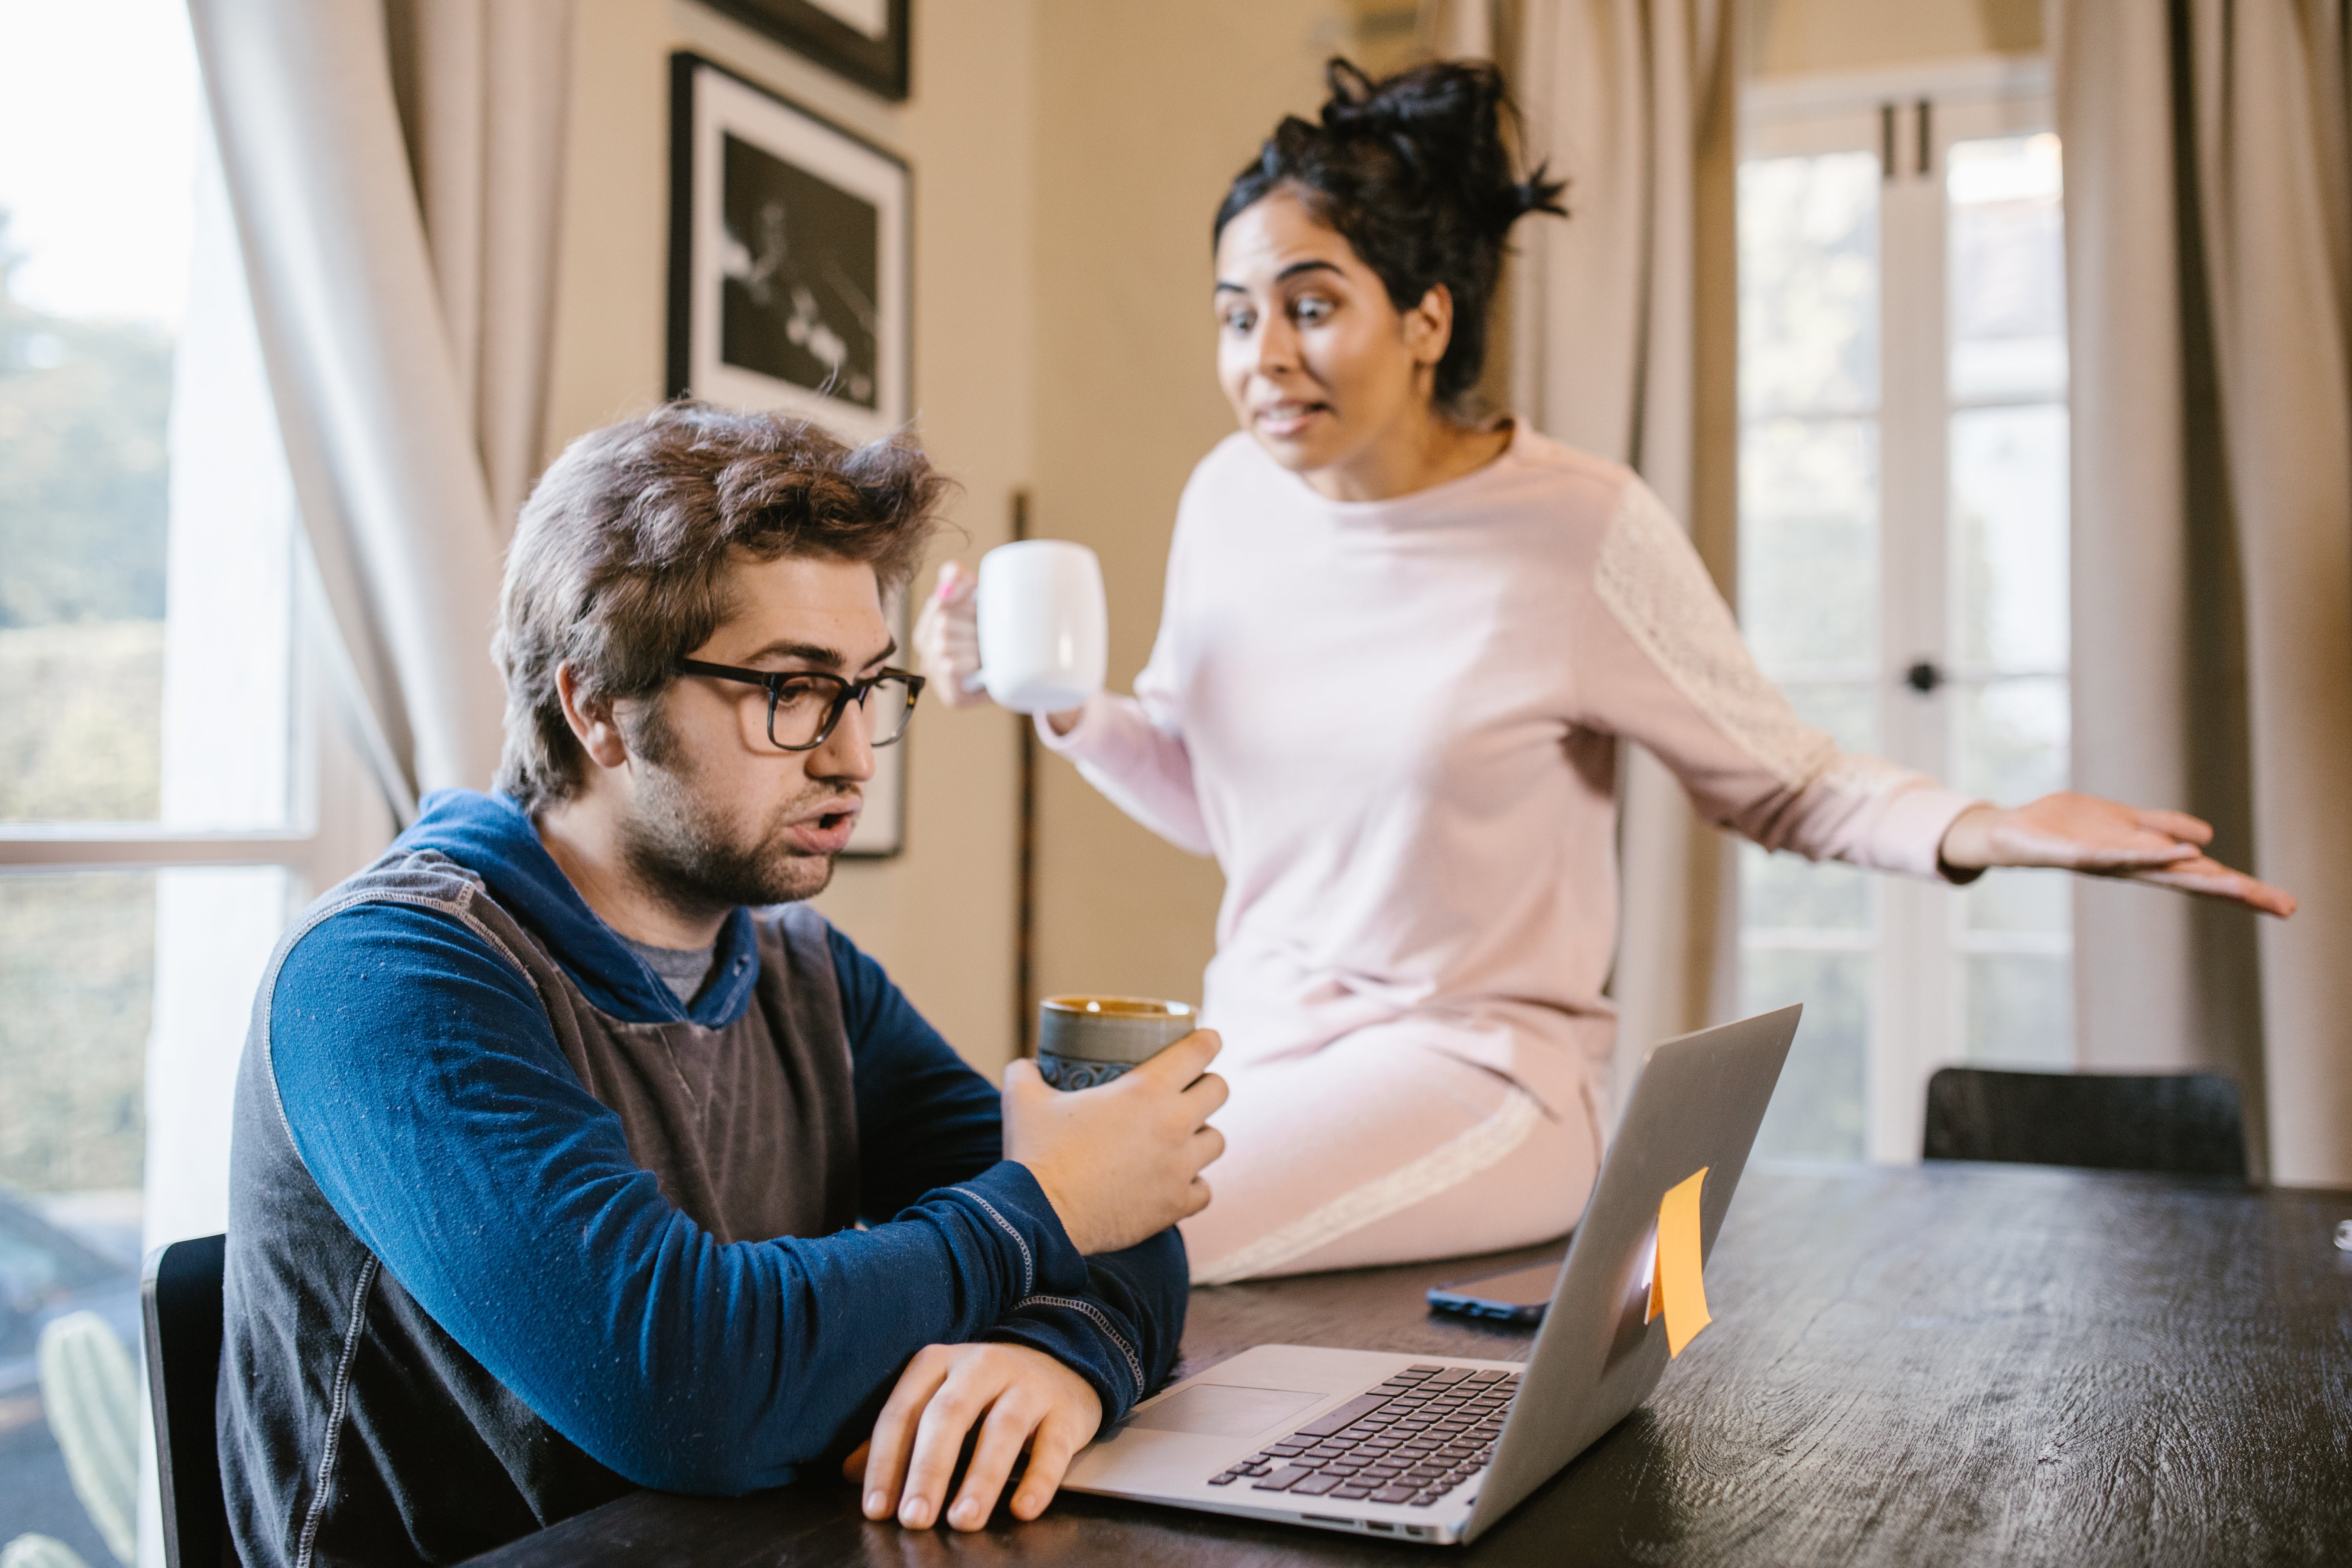 A couple holding mugs while one is seated in front of a computer and one is standing during an argument | Source: Pexels